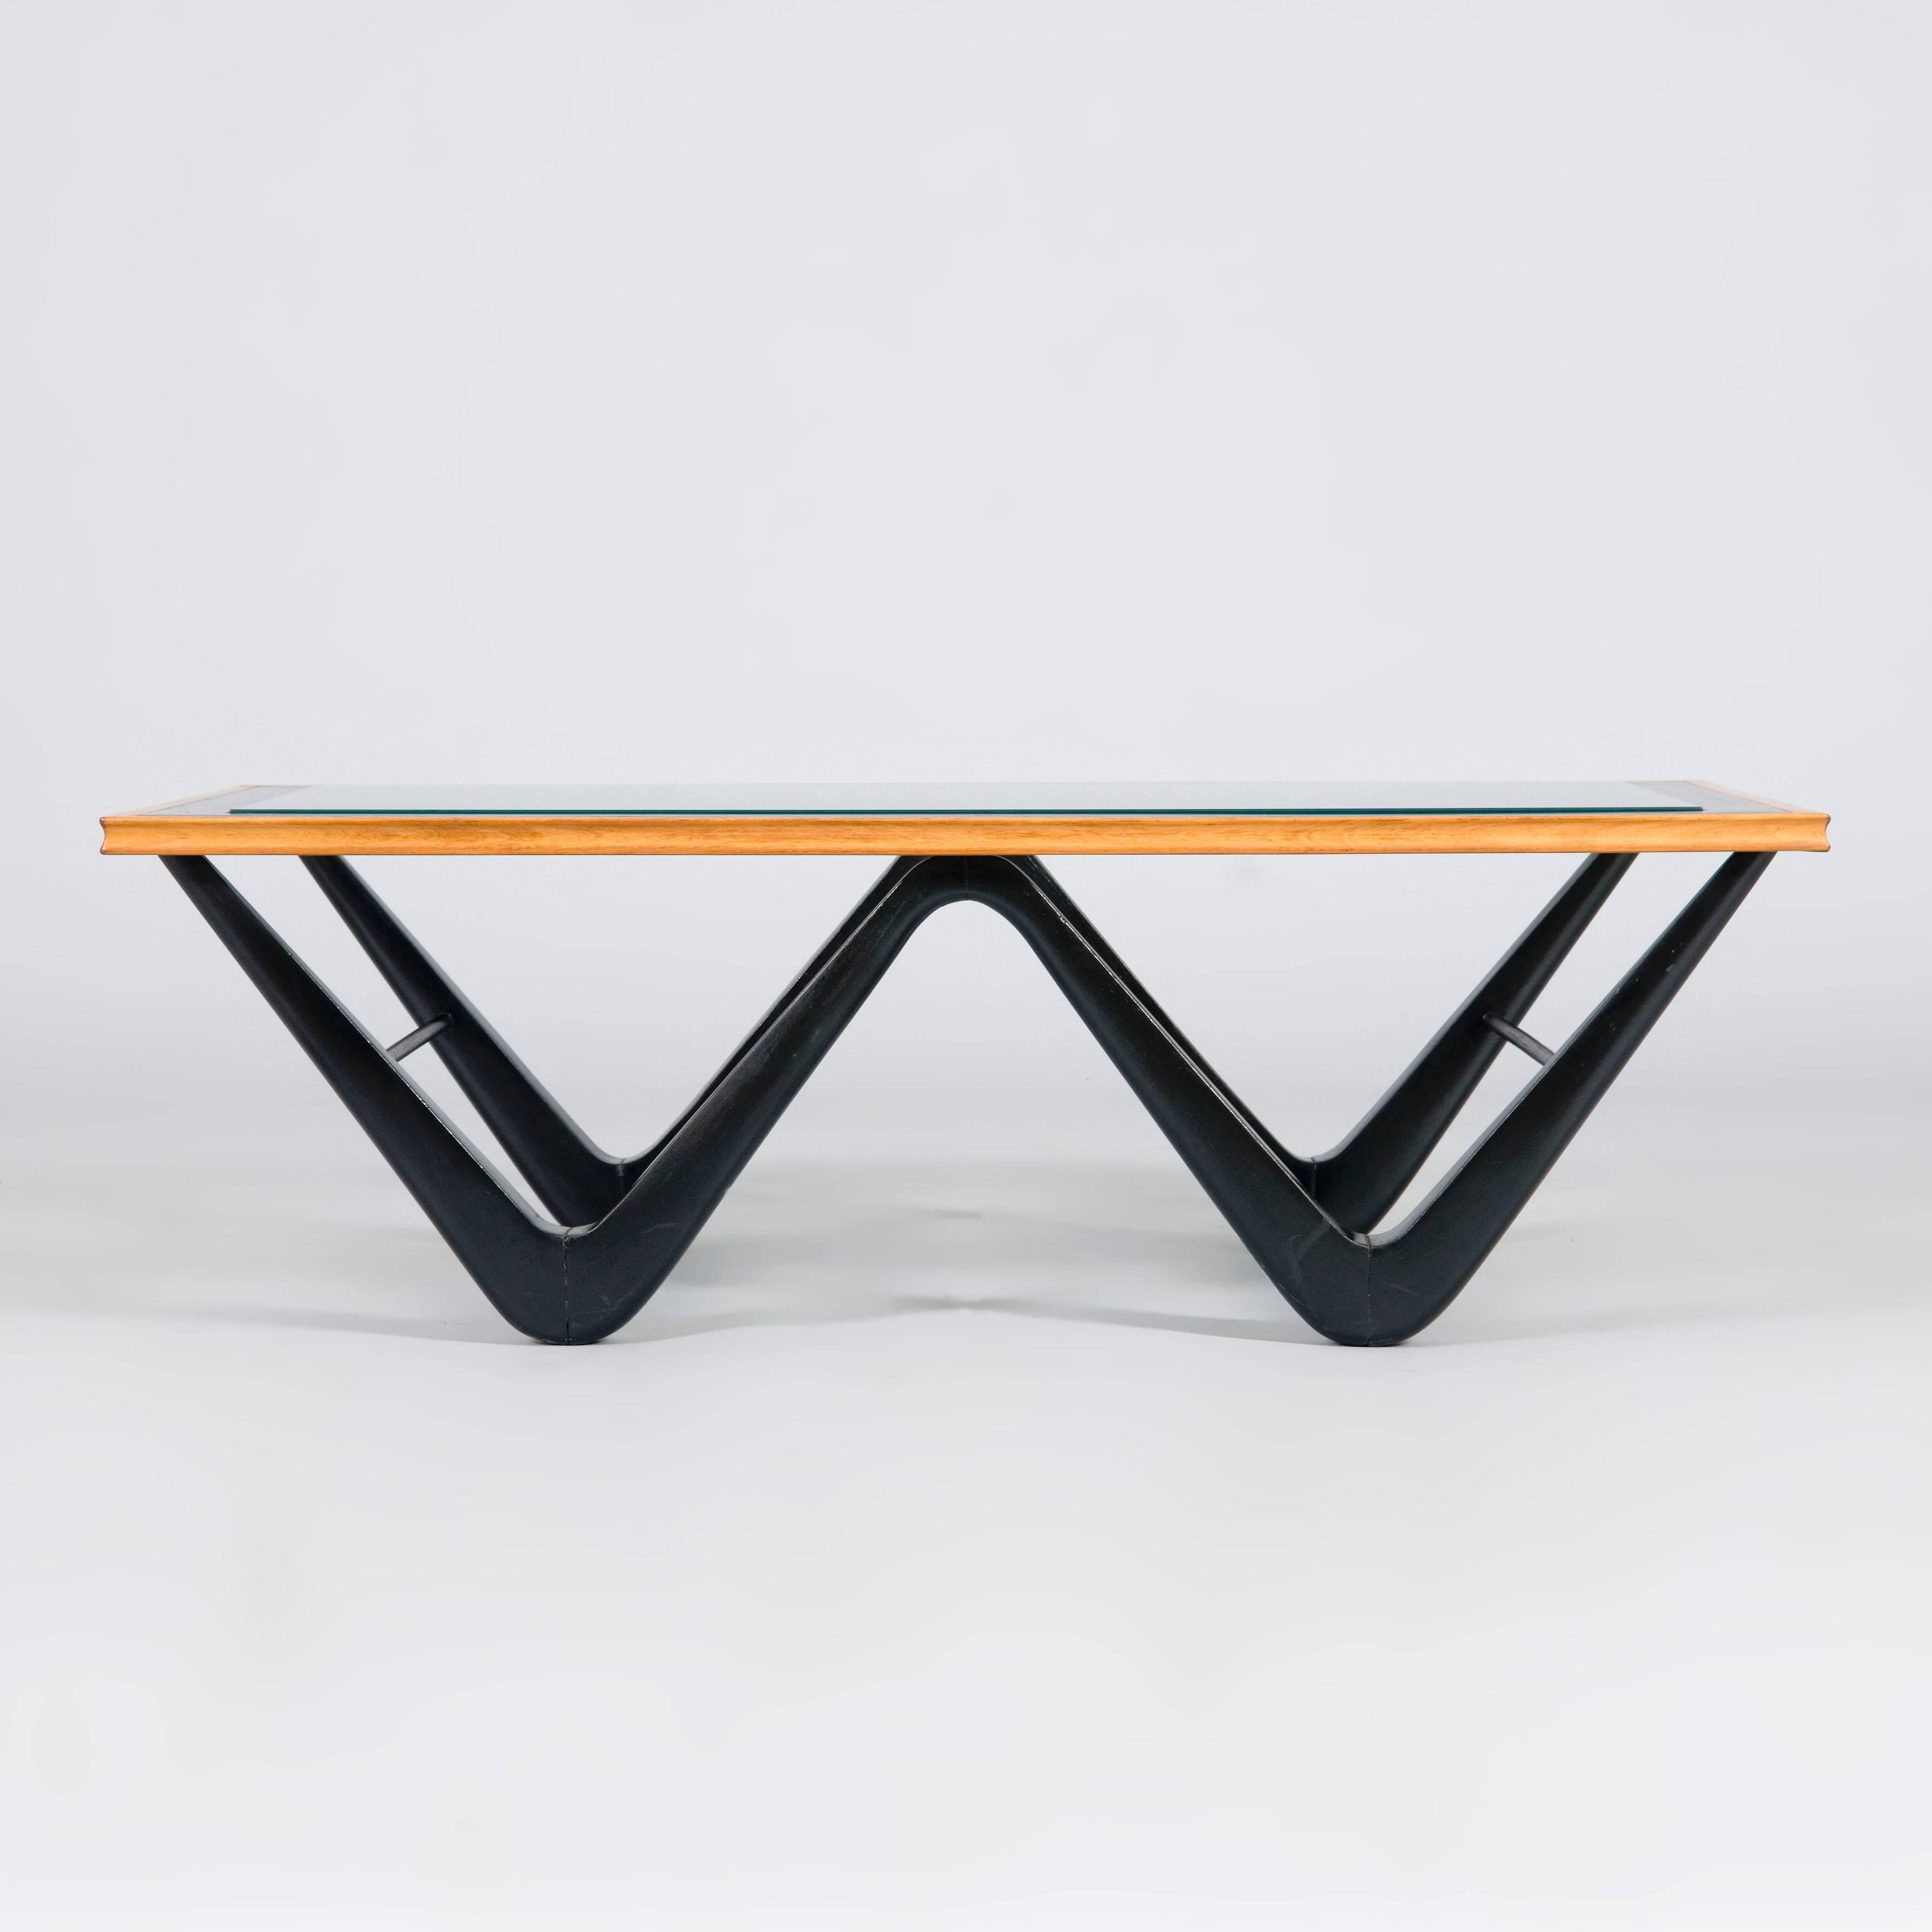 Black lacquer Pau Marfim low centre table attributed to Giuseppe Scapinelli, Brazil, 1950s.